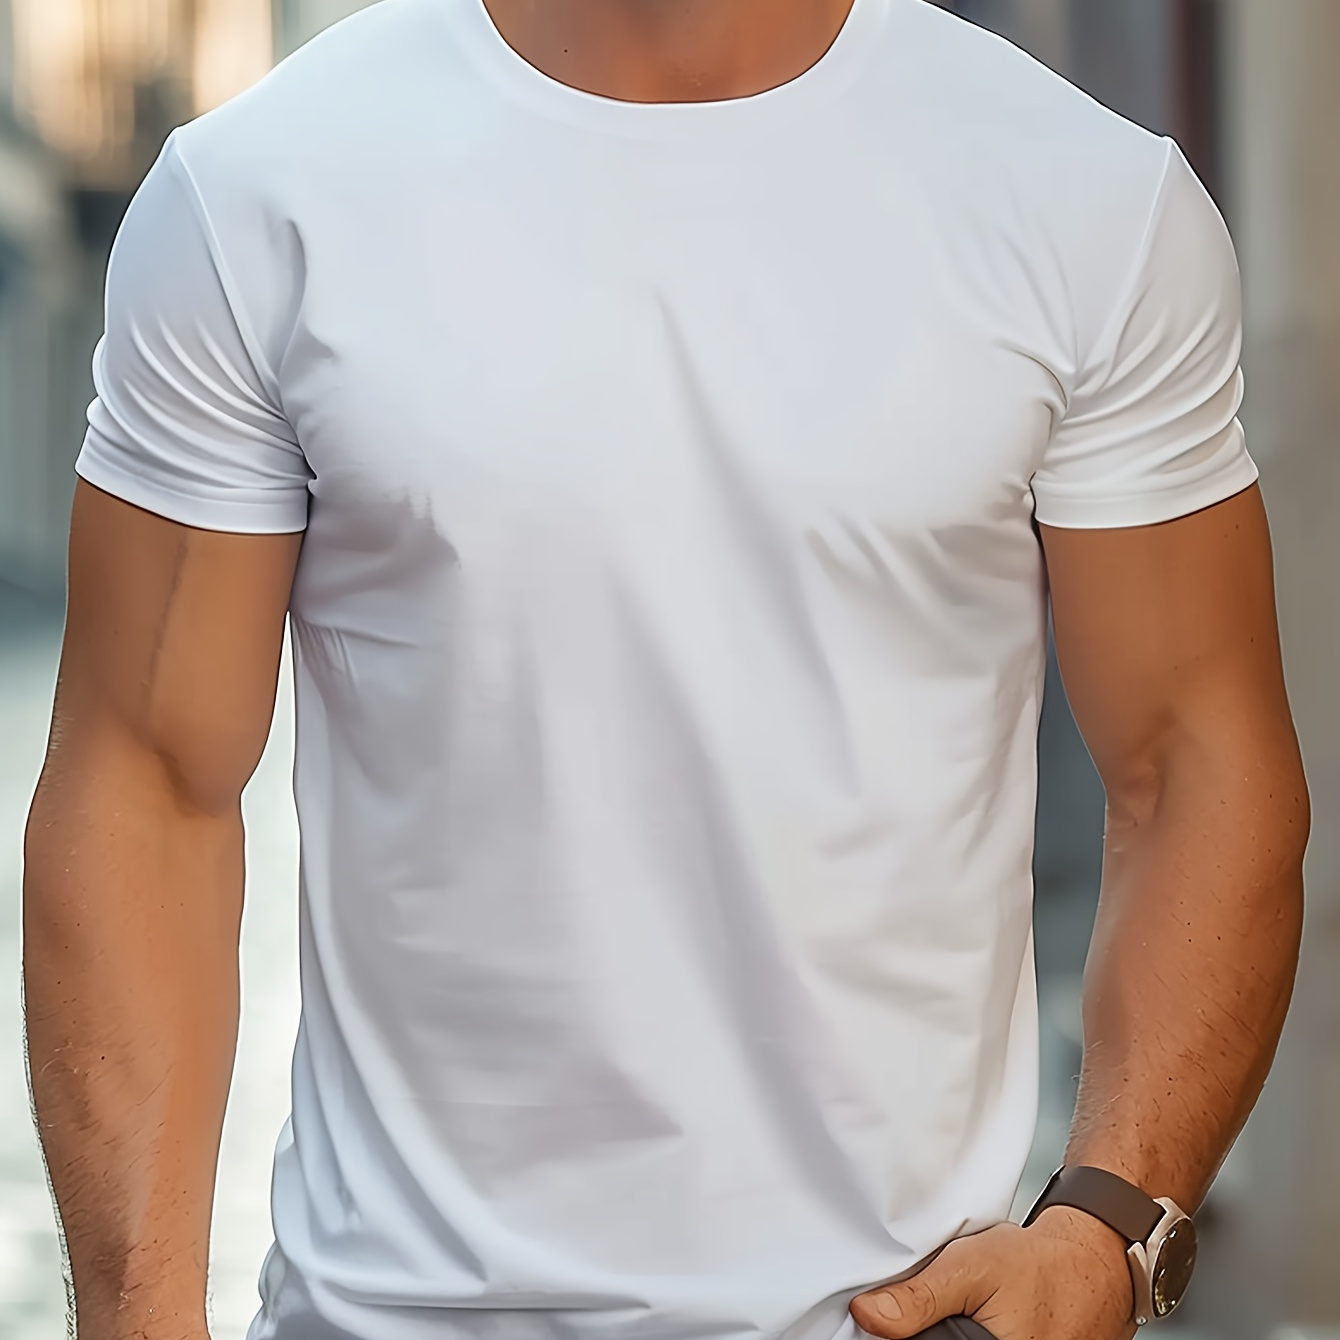 

Men's Casual Athletic Short Sleeve T-shirt In Solid Color, Sporty Classic Crew Neck T-shirt, Breathable And Comfortable For Everyday Wear